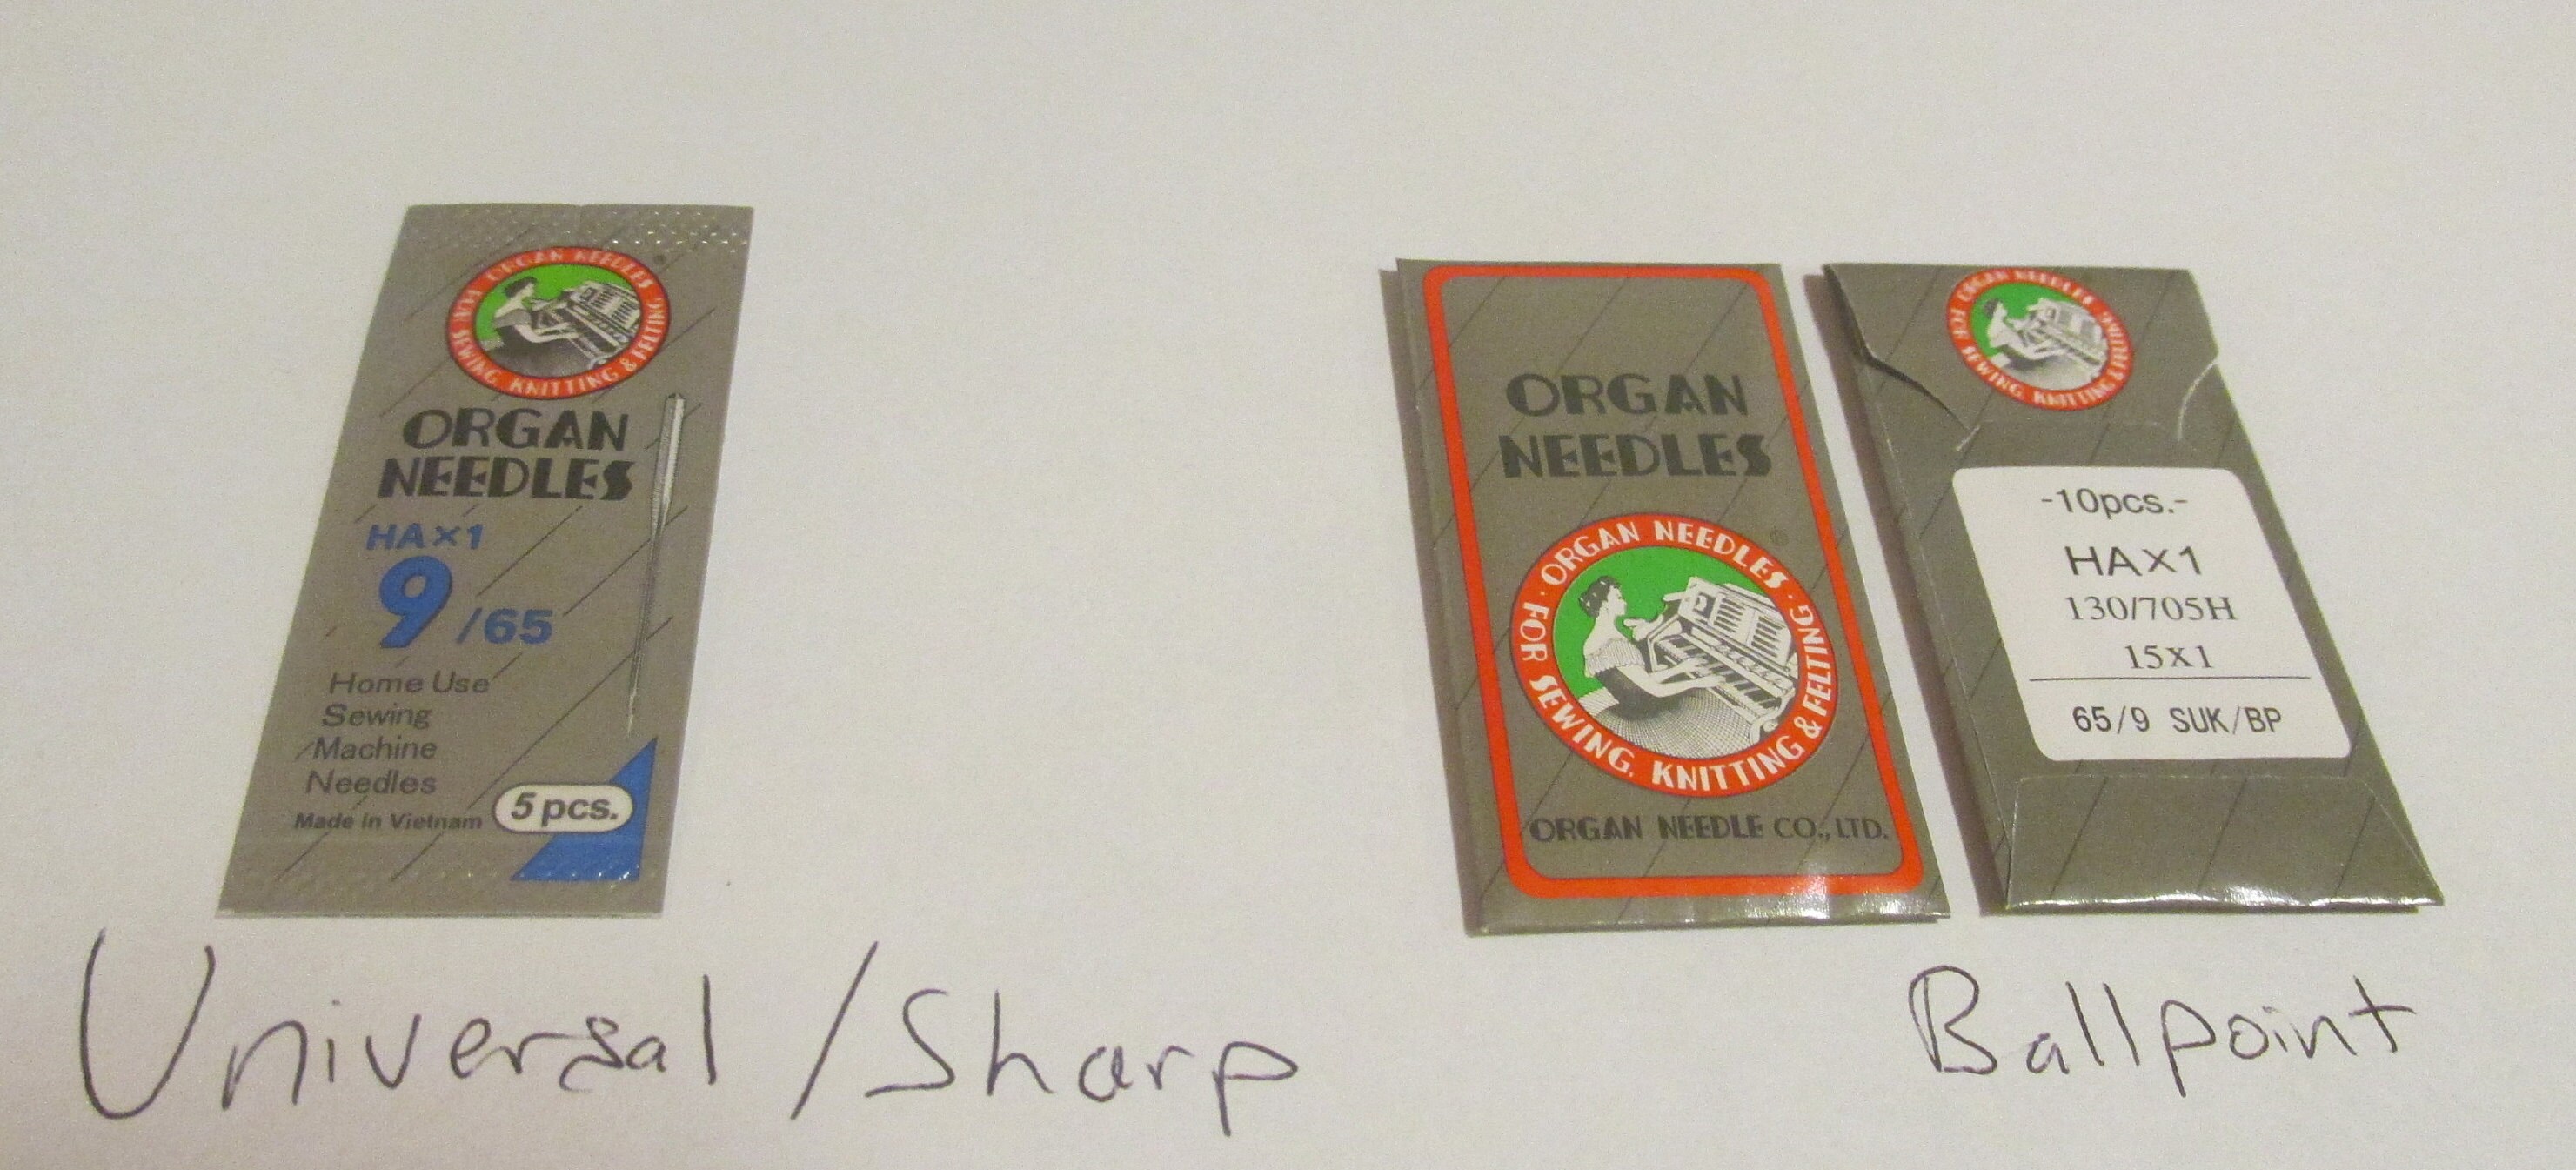 Organ Sewing Machine Needles Home-use Size 110/18-10 pcs per Pack